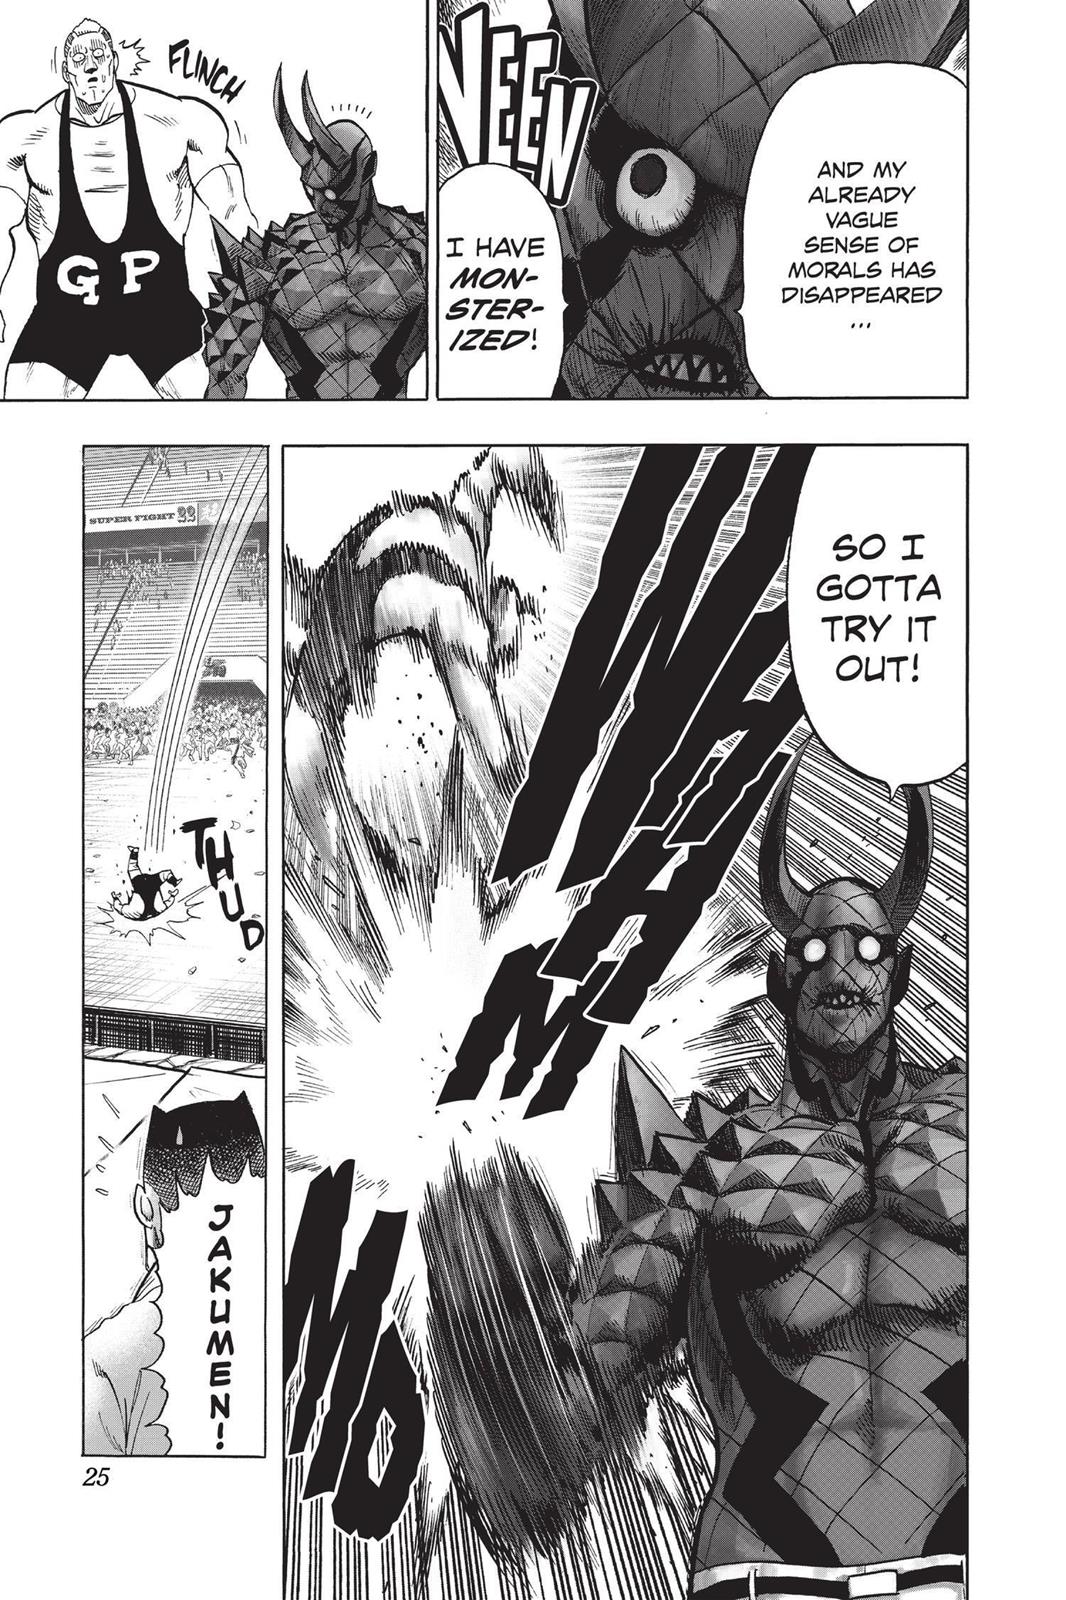 One-Punch Man, Punch 72 image 25